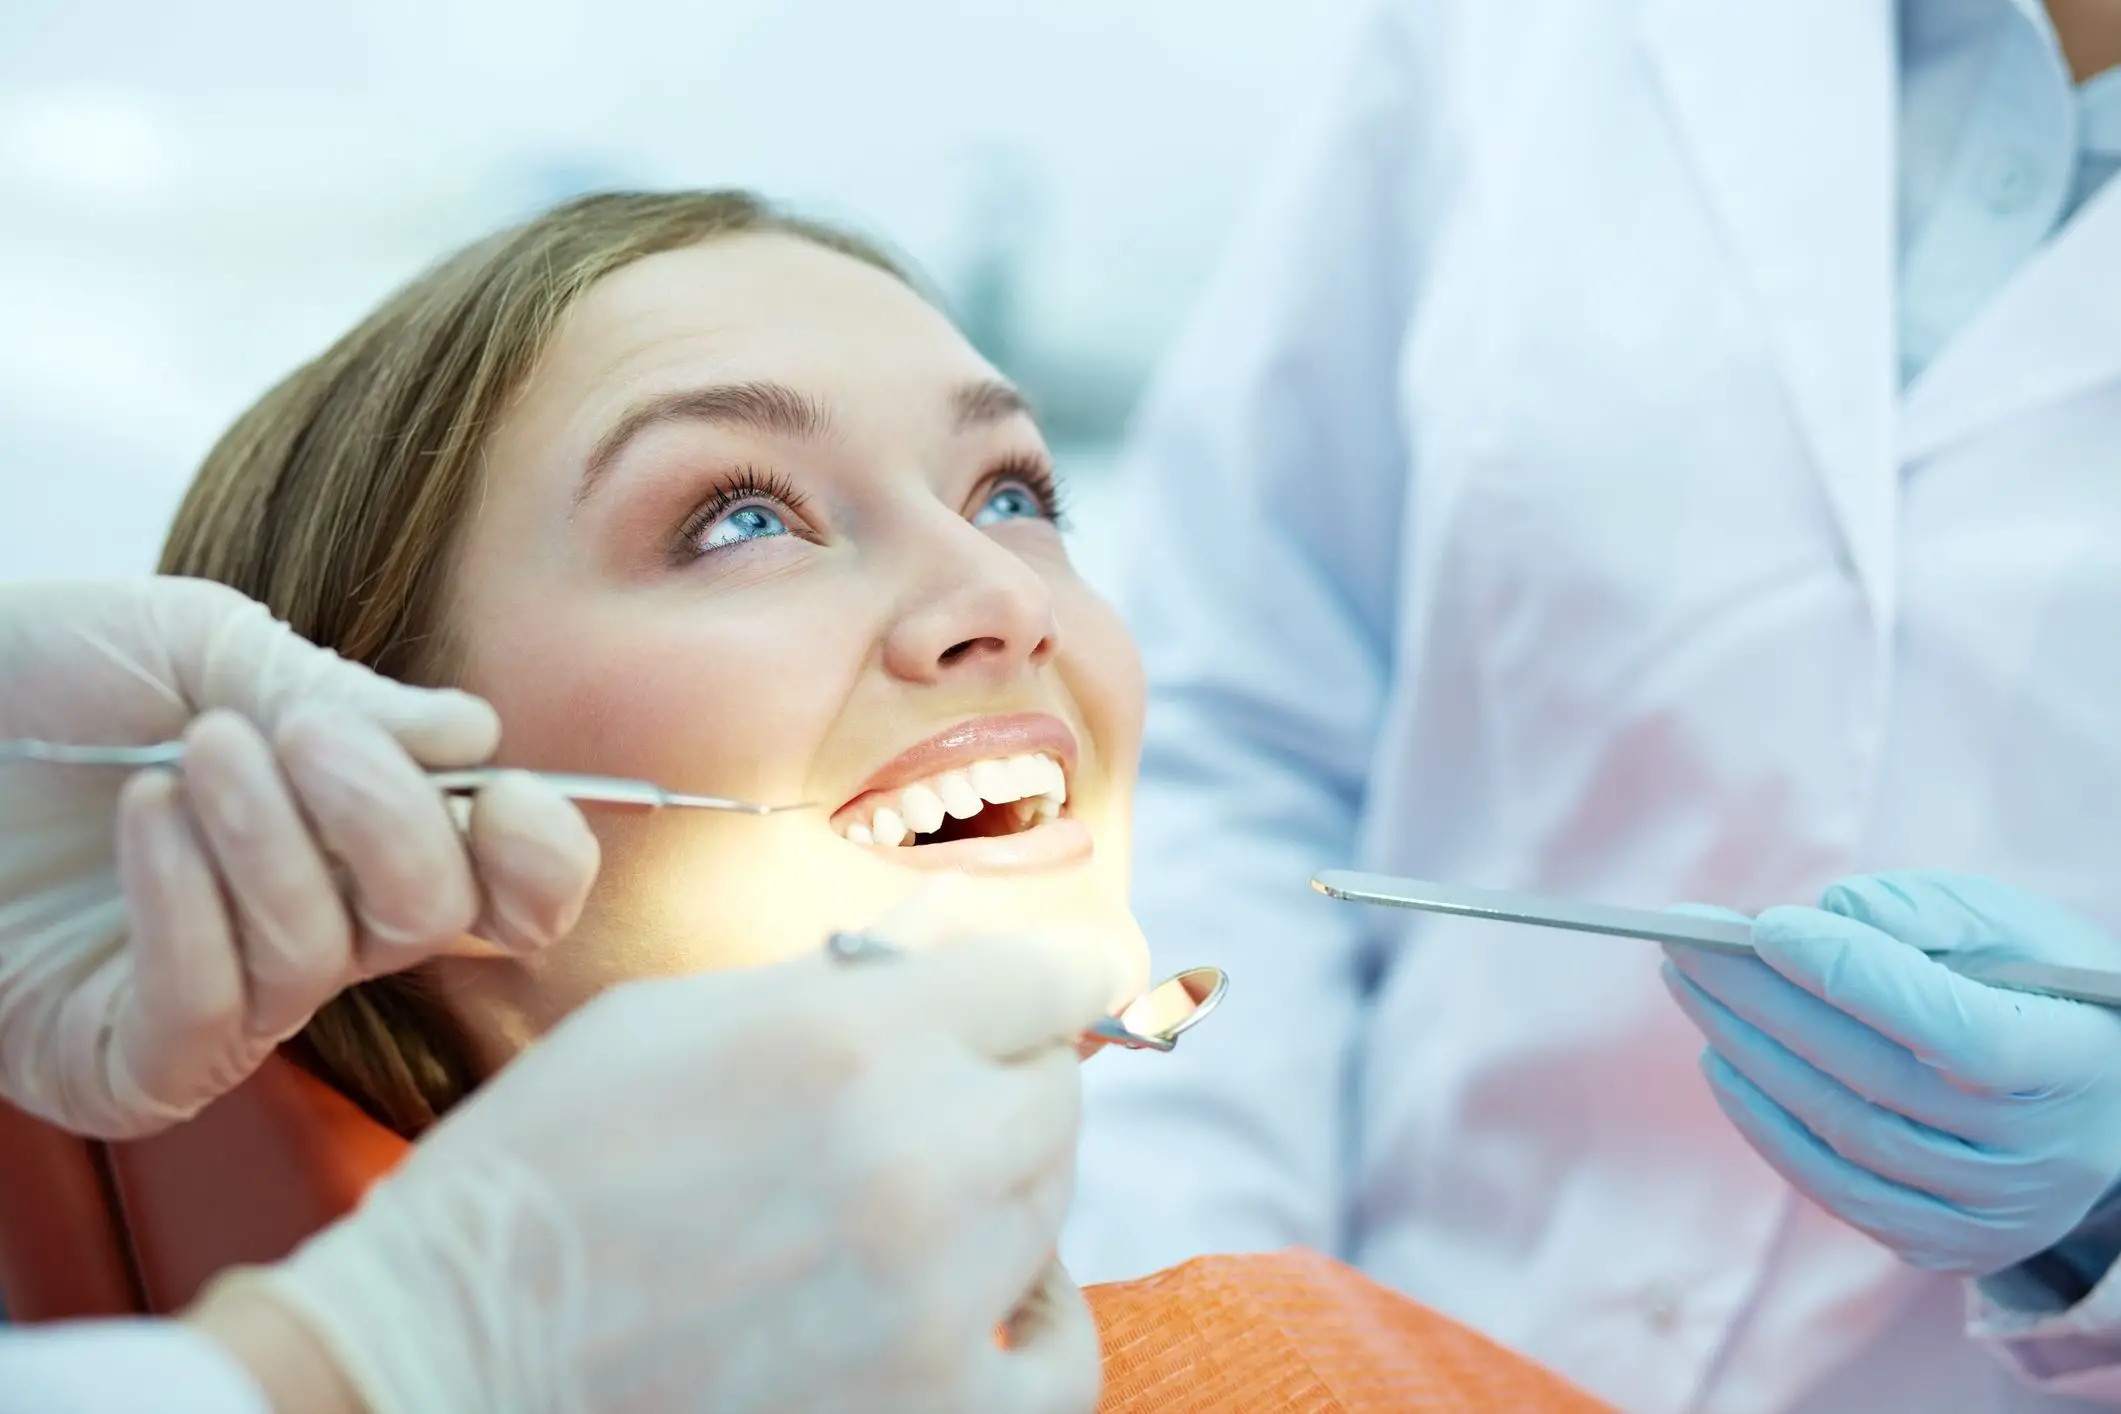 How to Find Good Orthodontic Dental Insurance